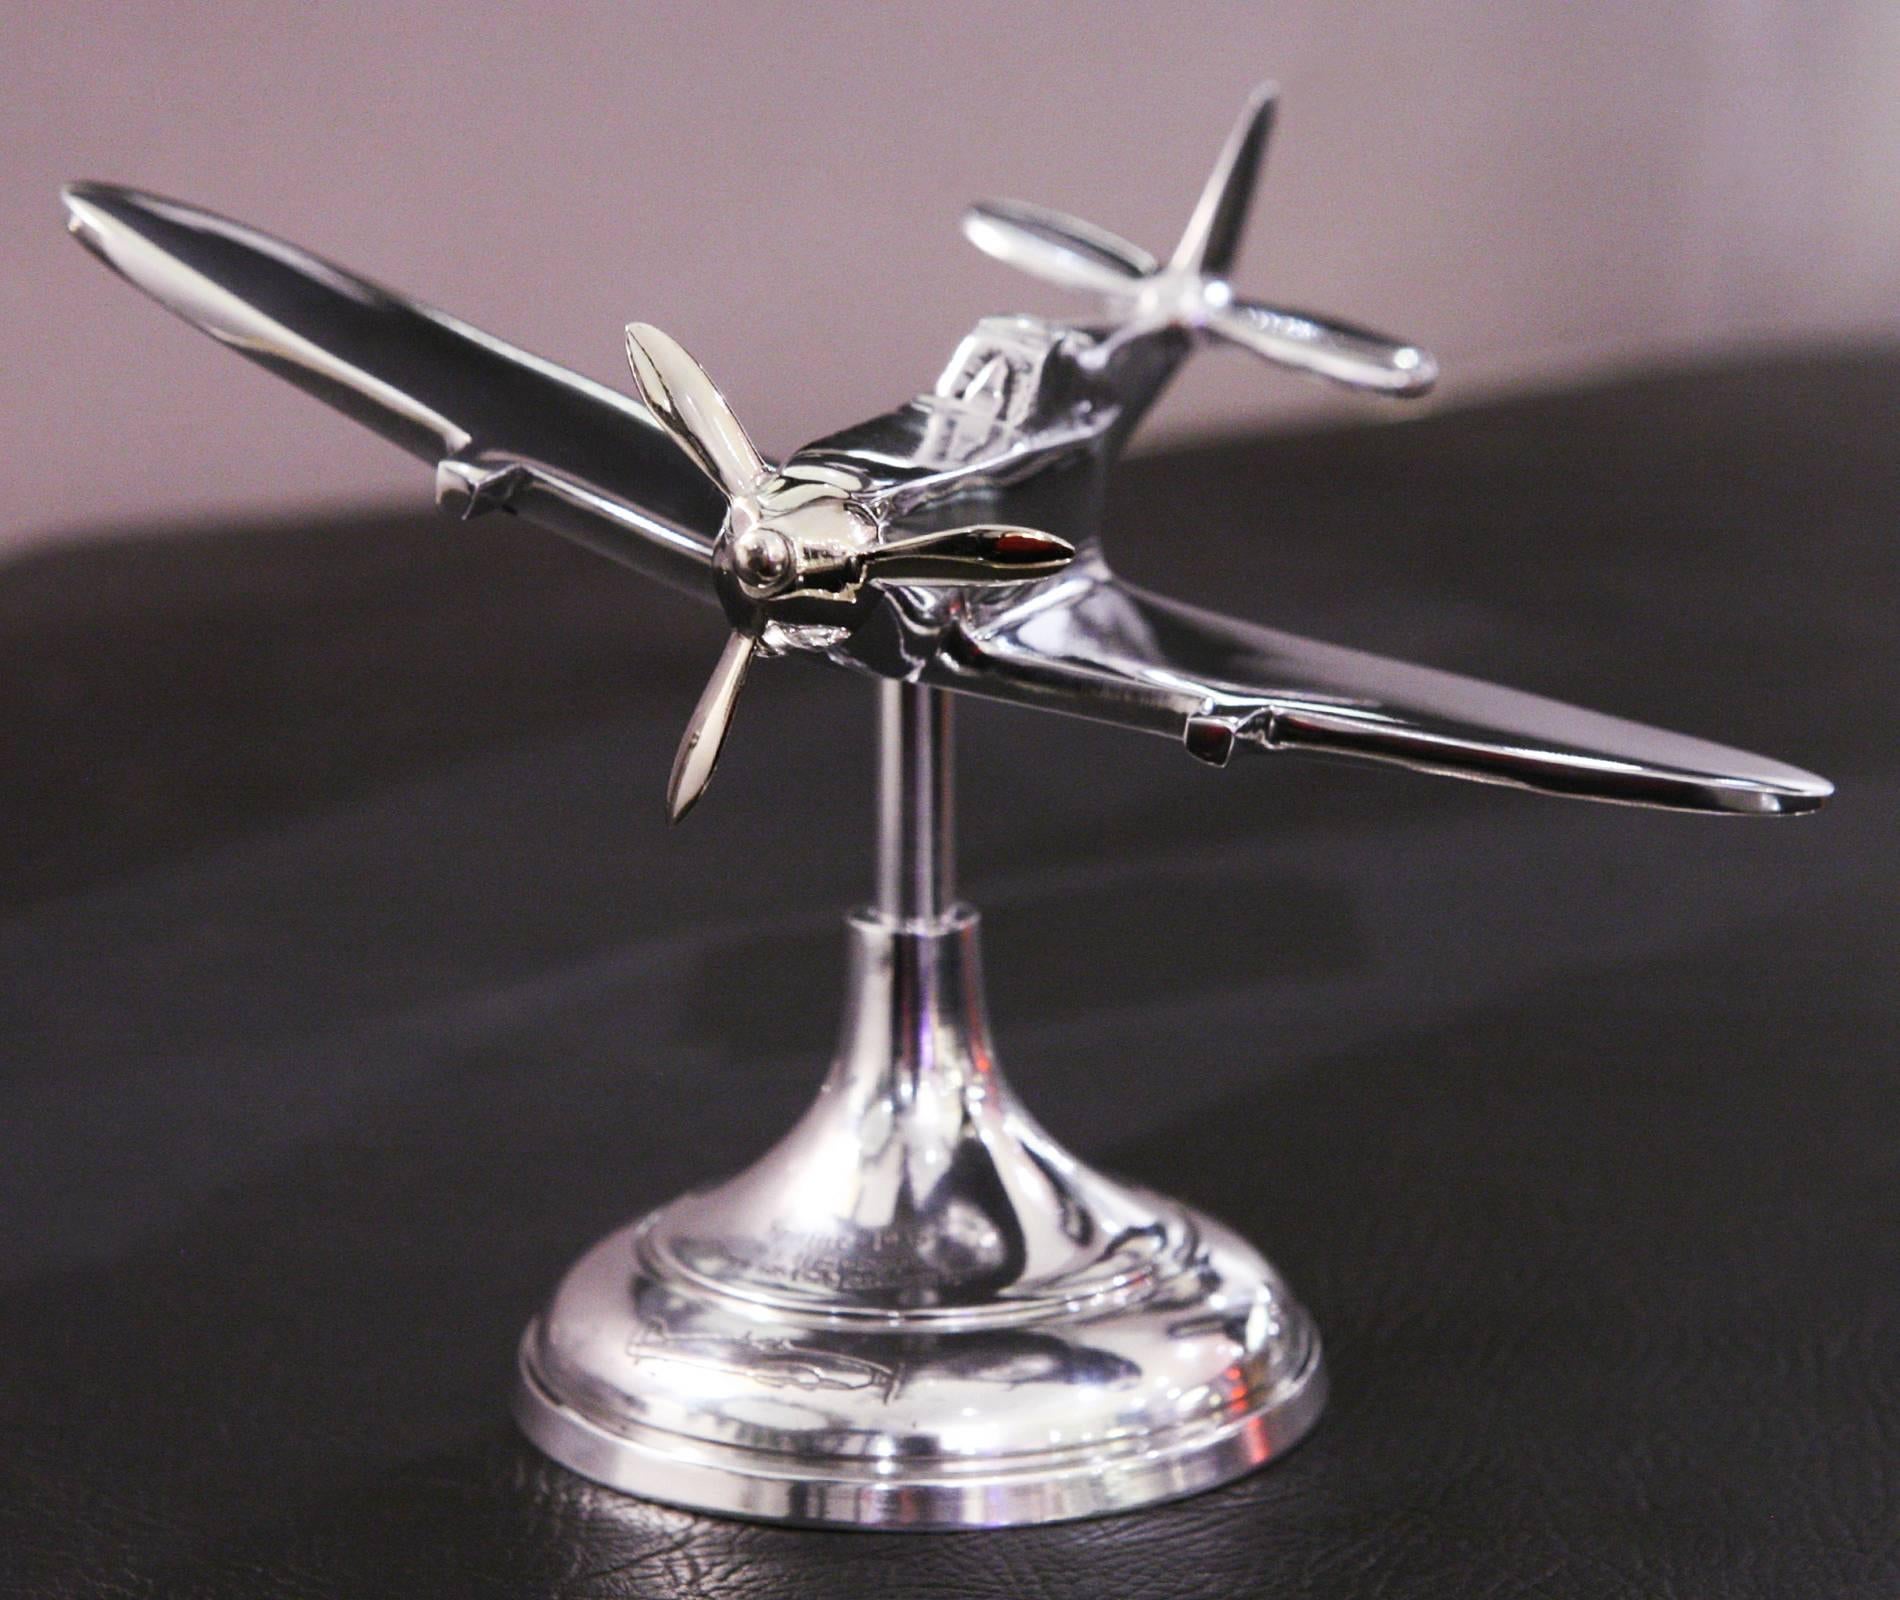 Desk model Spitfire all in solid aluminium in
highly polished silver finish.